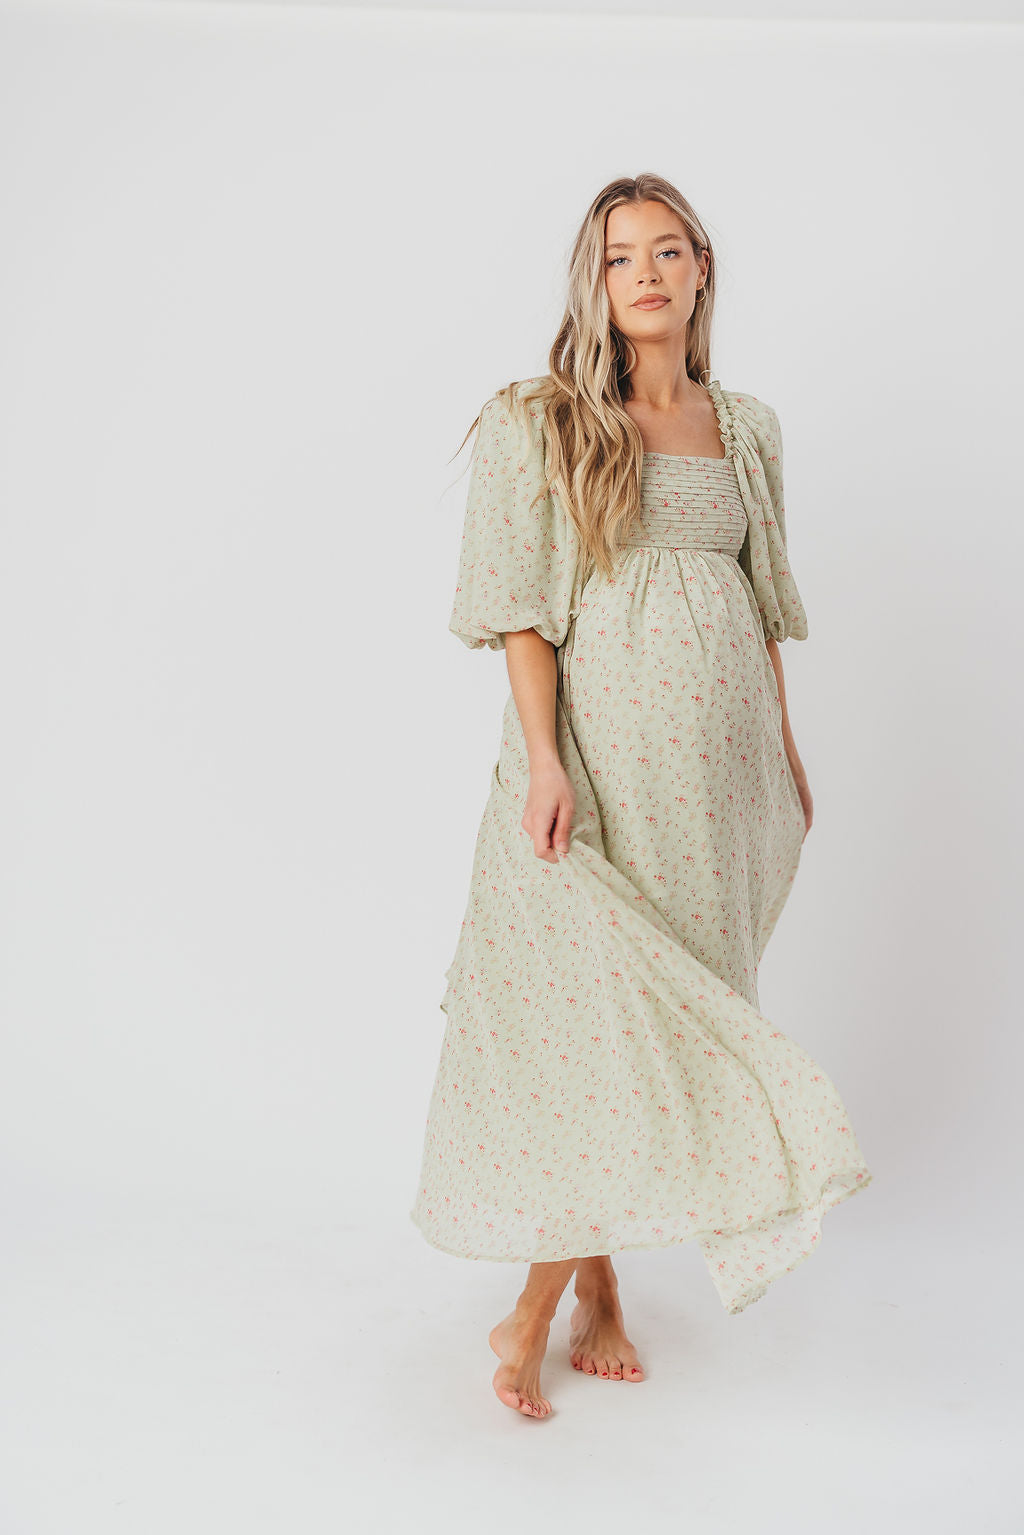 Melody Maxi Dress with Pleats and Bow Detail in Mint Floral - Bump Friendly & Inclusive Sizing (S-3XL) $30 OFF THIS WEEK